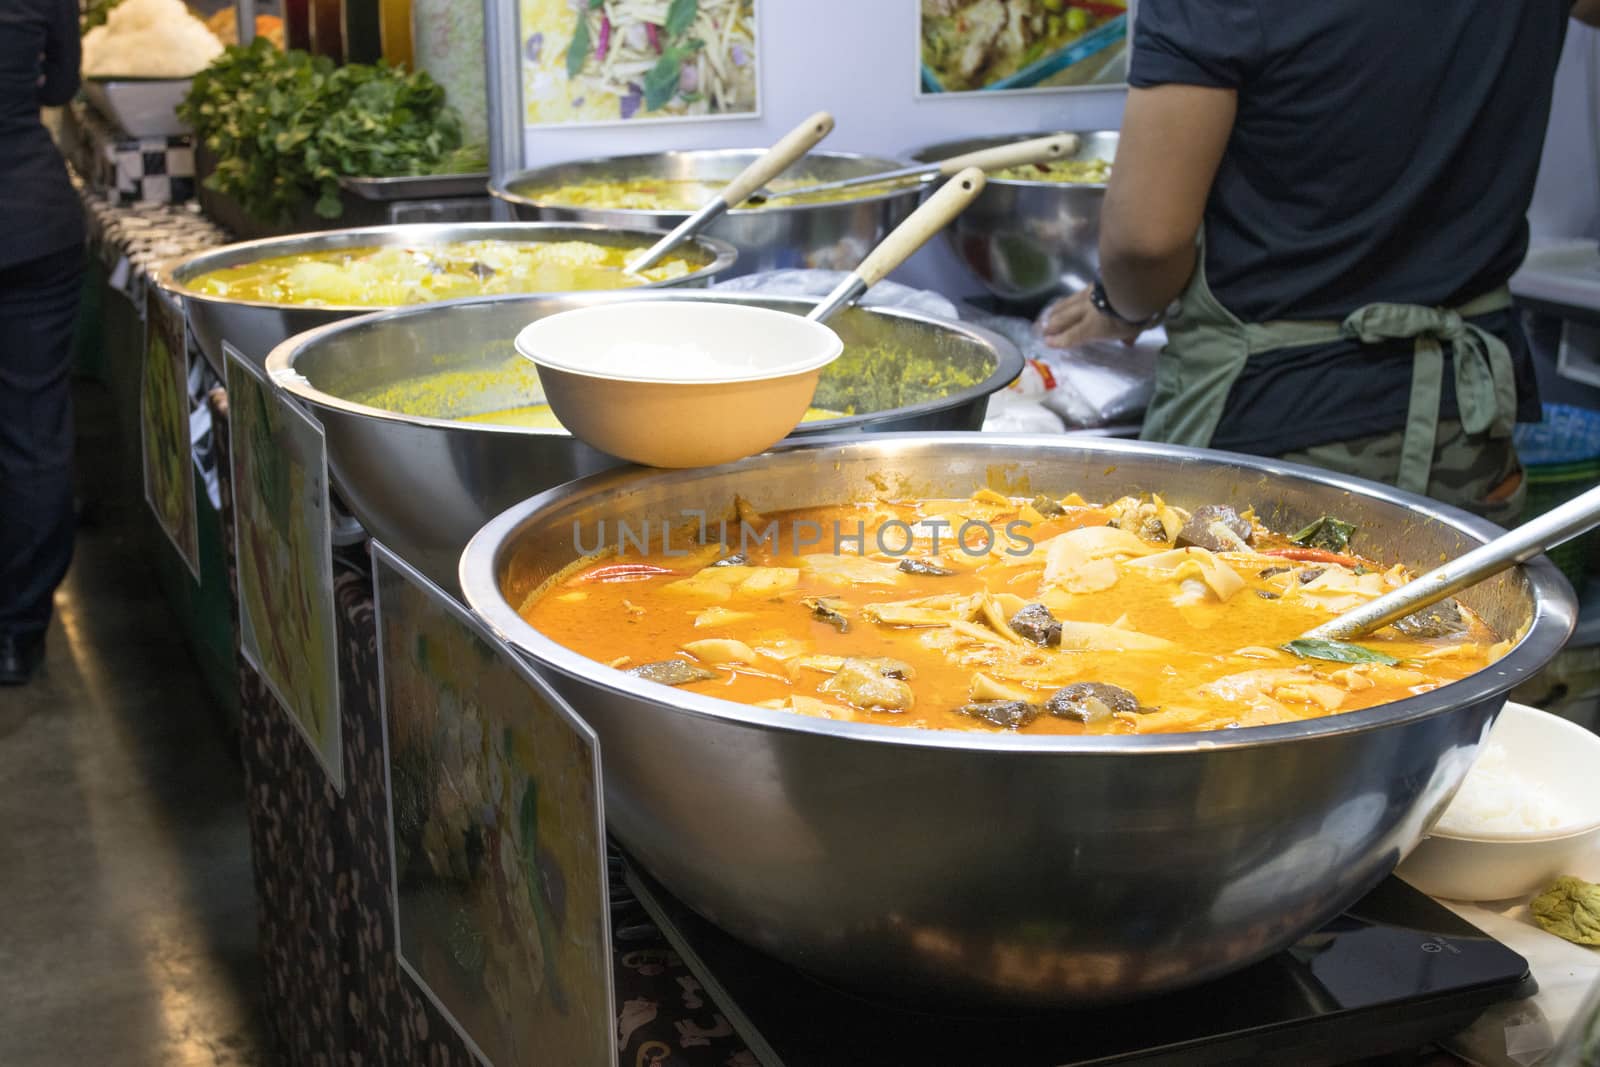 Thai street foods, Thai foods style Rice and Curry at market Bangkok of Thailand.